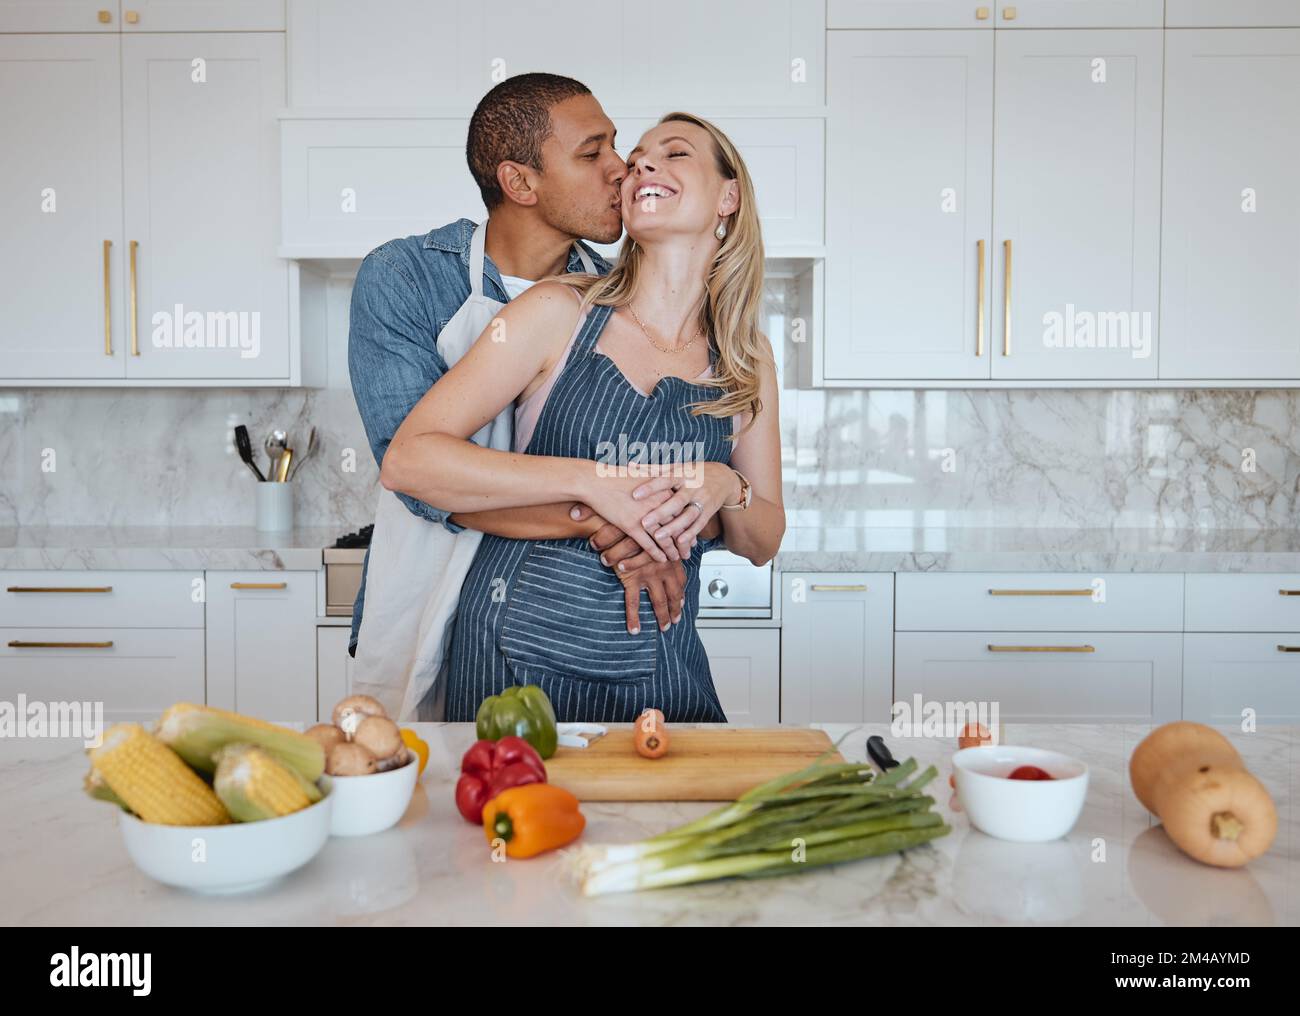 Couple, cooking food and love of vegetables with a kiss on the cheek while helping with dinner at home. Man and woman in Uk with a healthy lifestyle Stock Photo